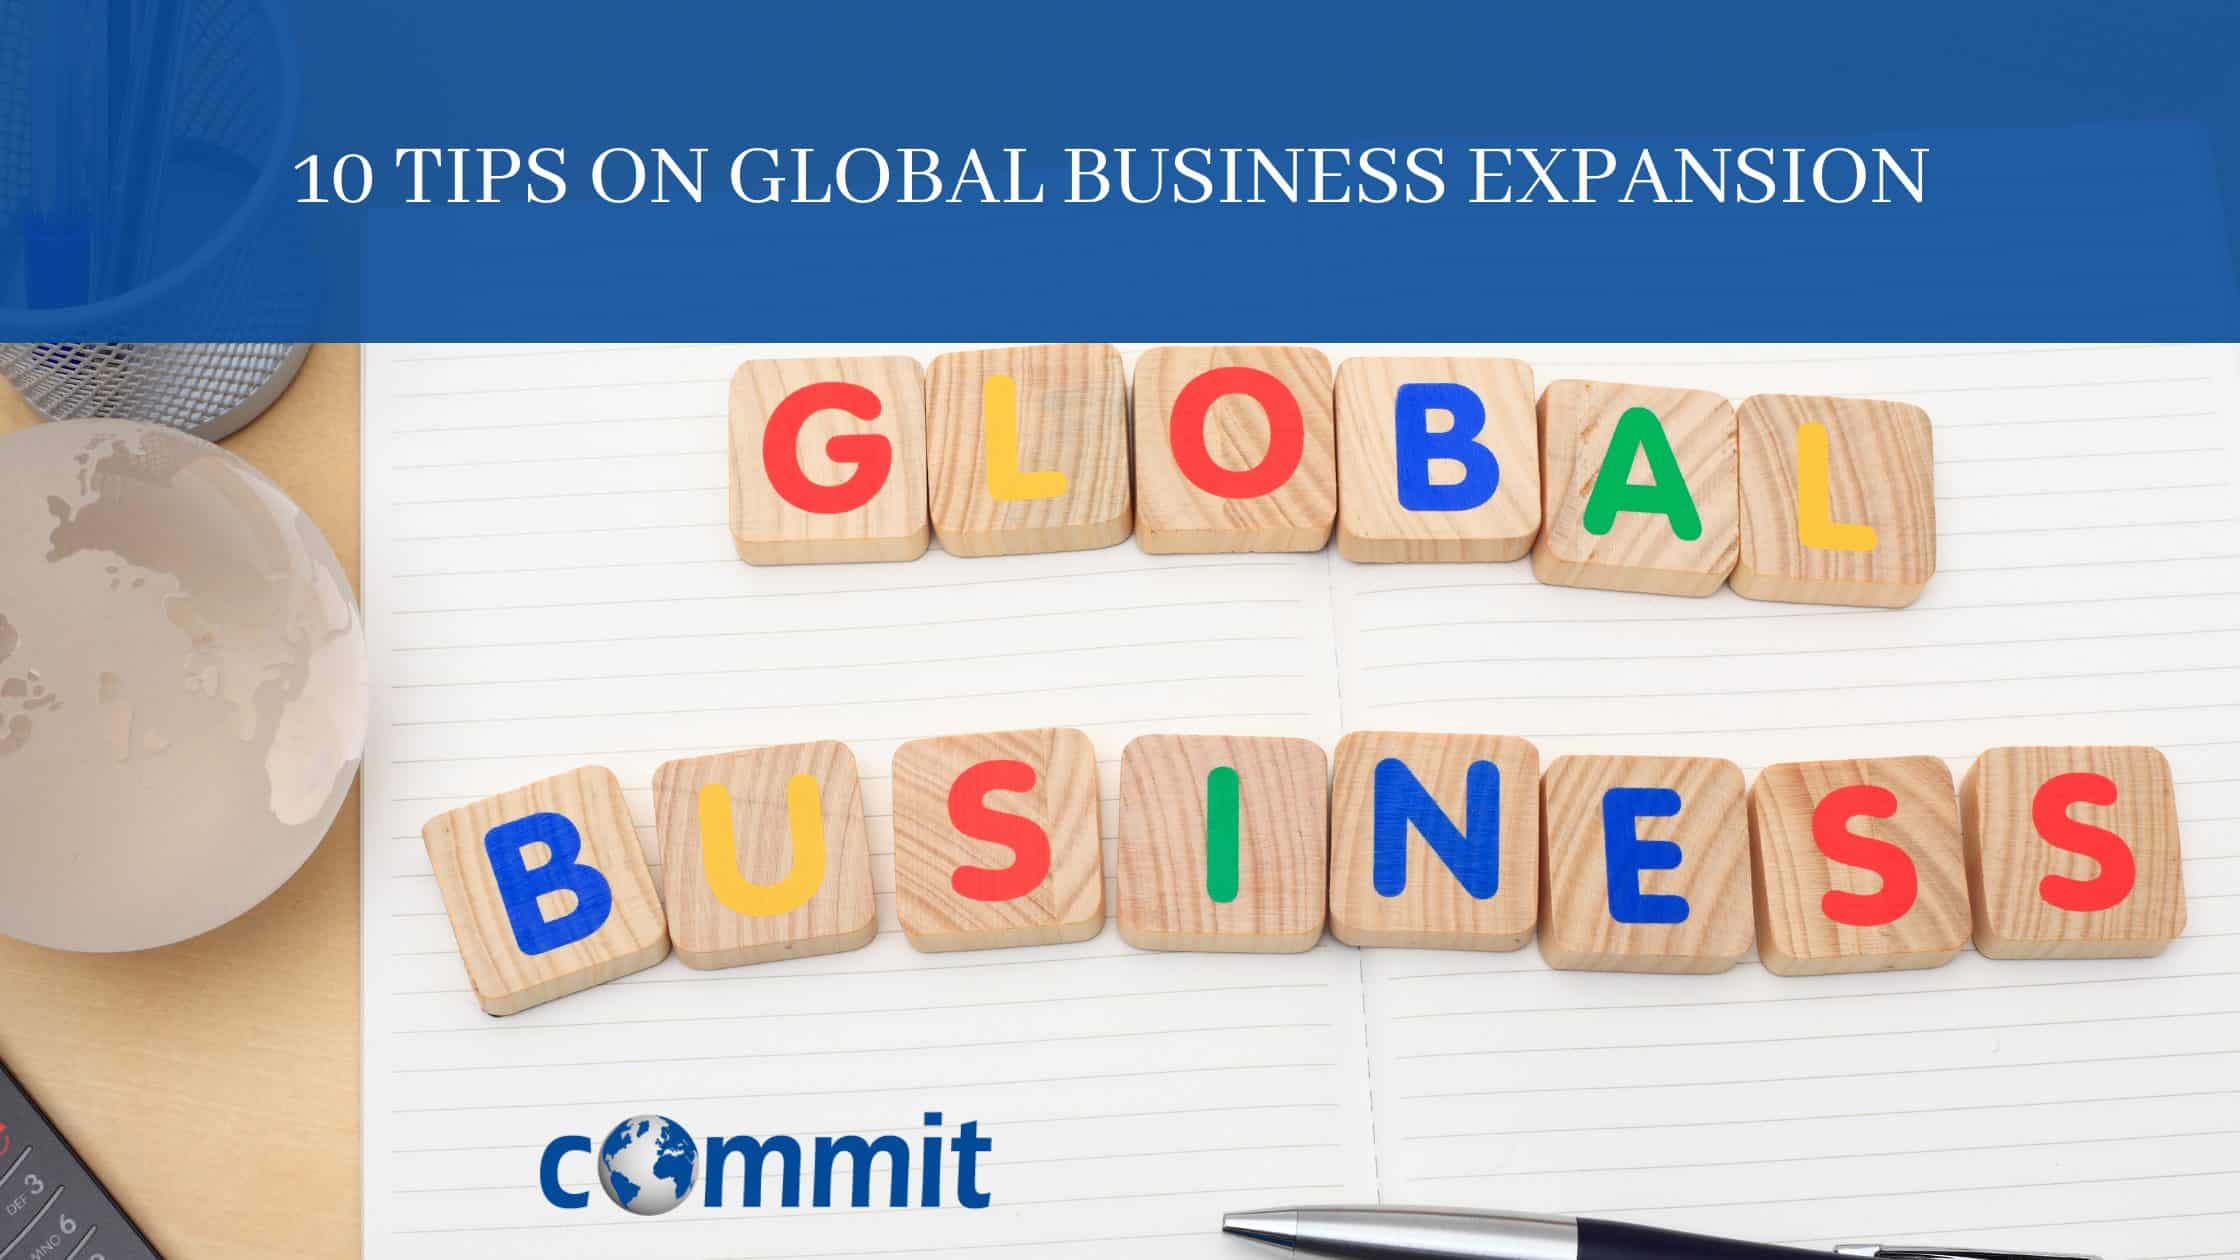 10 tips on global business expansion